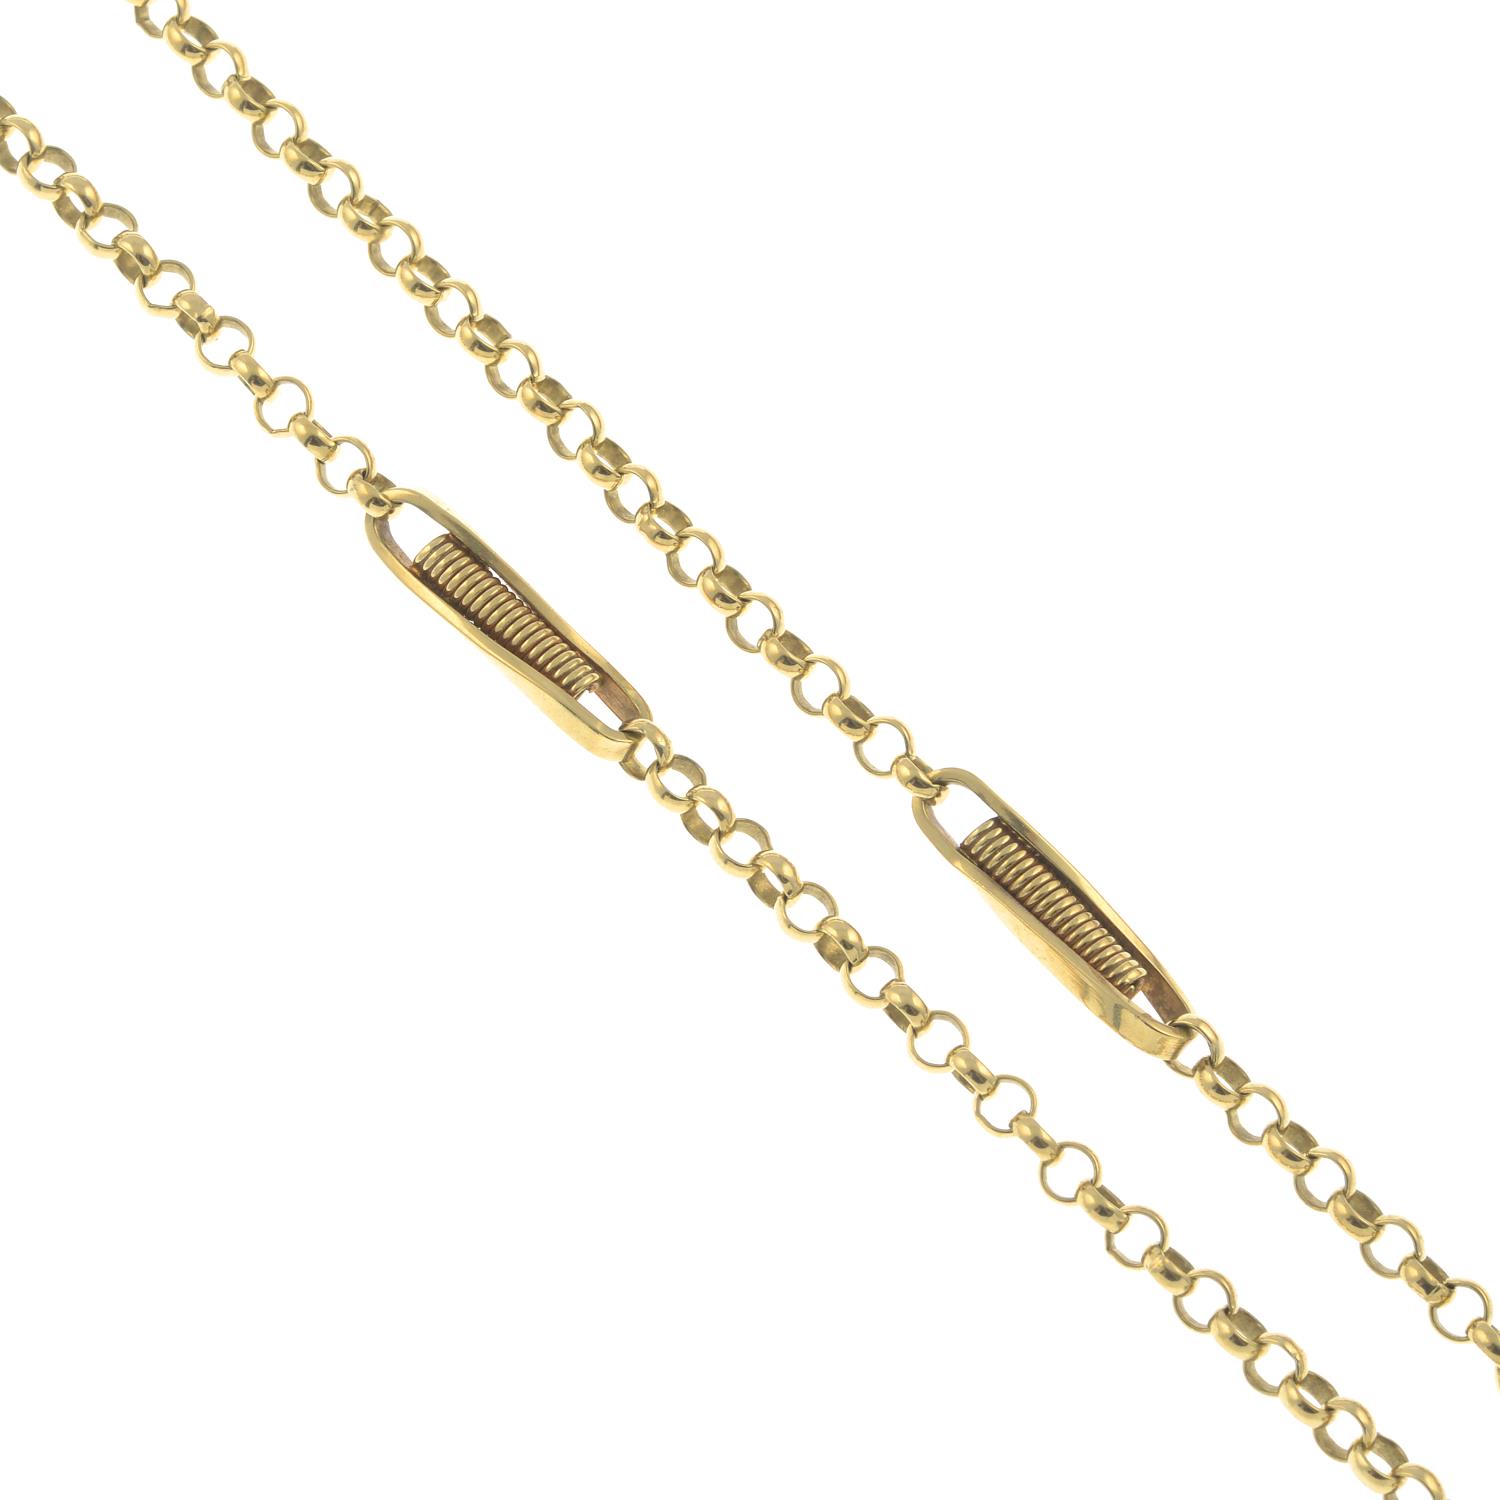 A 9ct gold fancy-link chain.Hallmarks for 9ct gold.